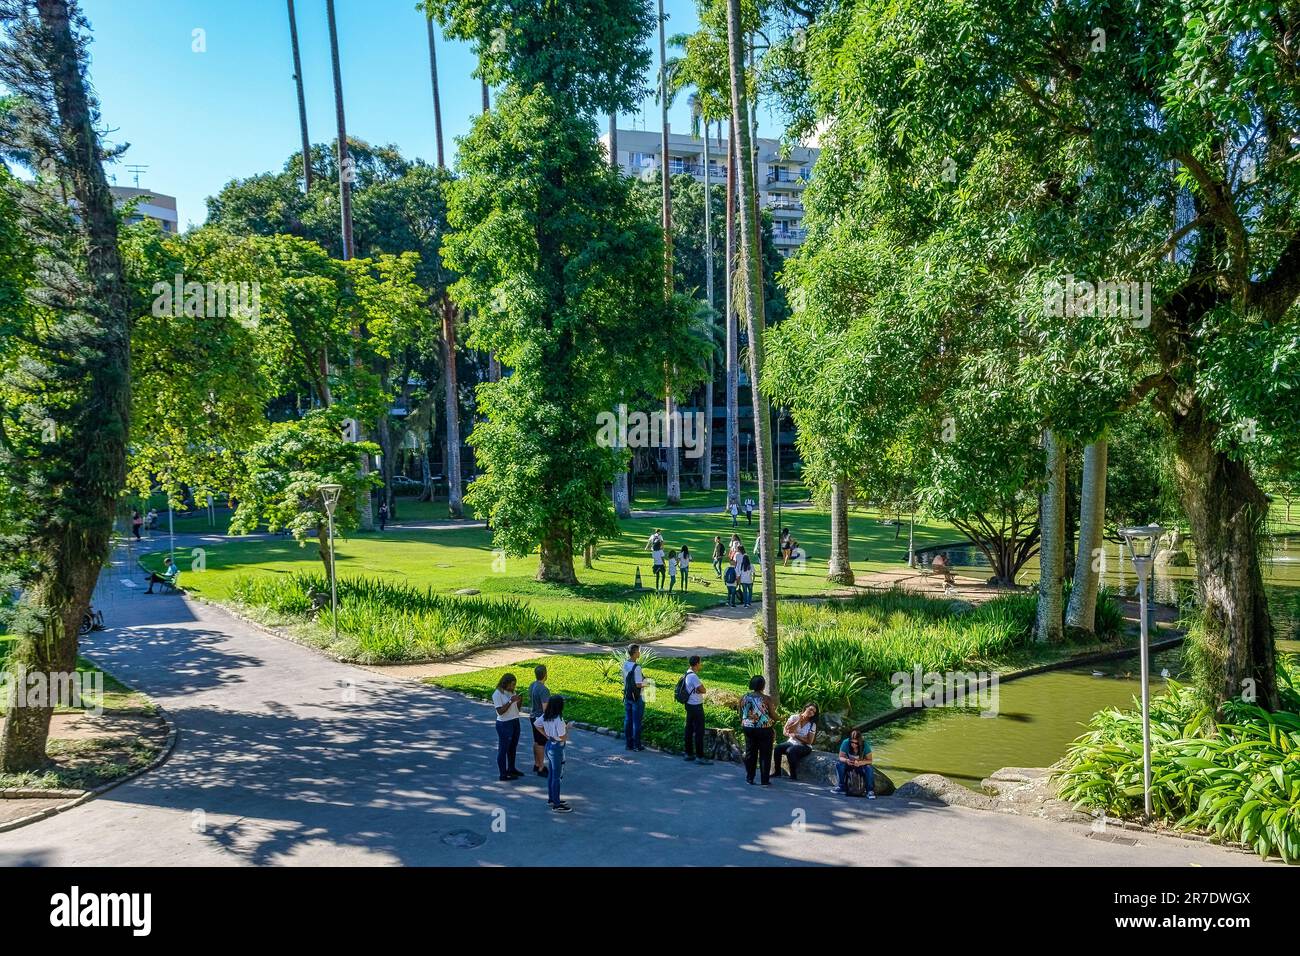 Rio de Janeiro, Brazil - June 8, 2023: People stand on a walkway in a public garden, alongside a flowing water channel. Trees and other individuals ar Stock Photo